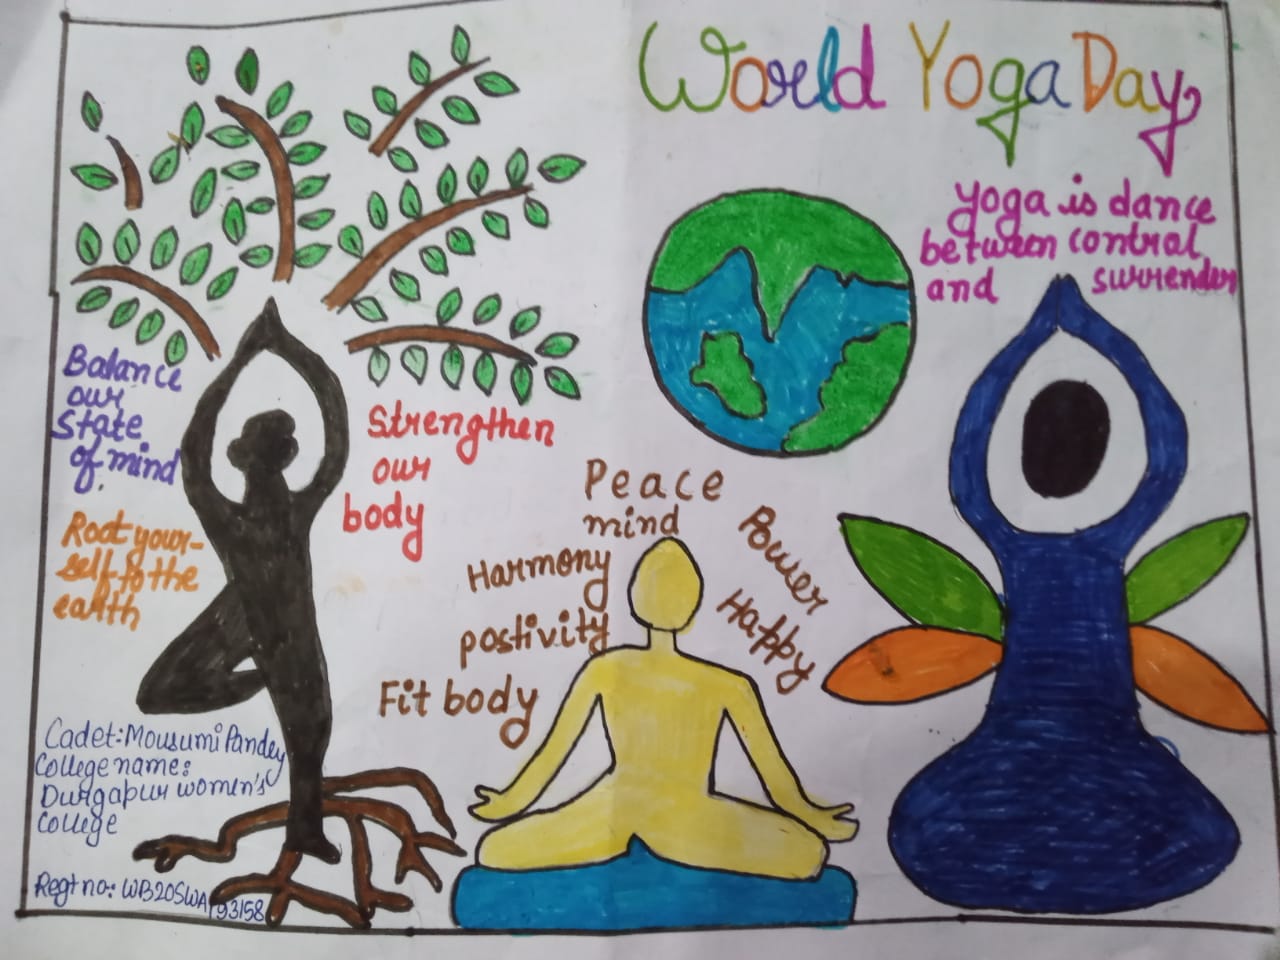 How to draw International yoga day (world yoga day) poster for beginners -  step by step - YouTube